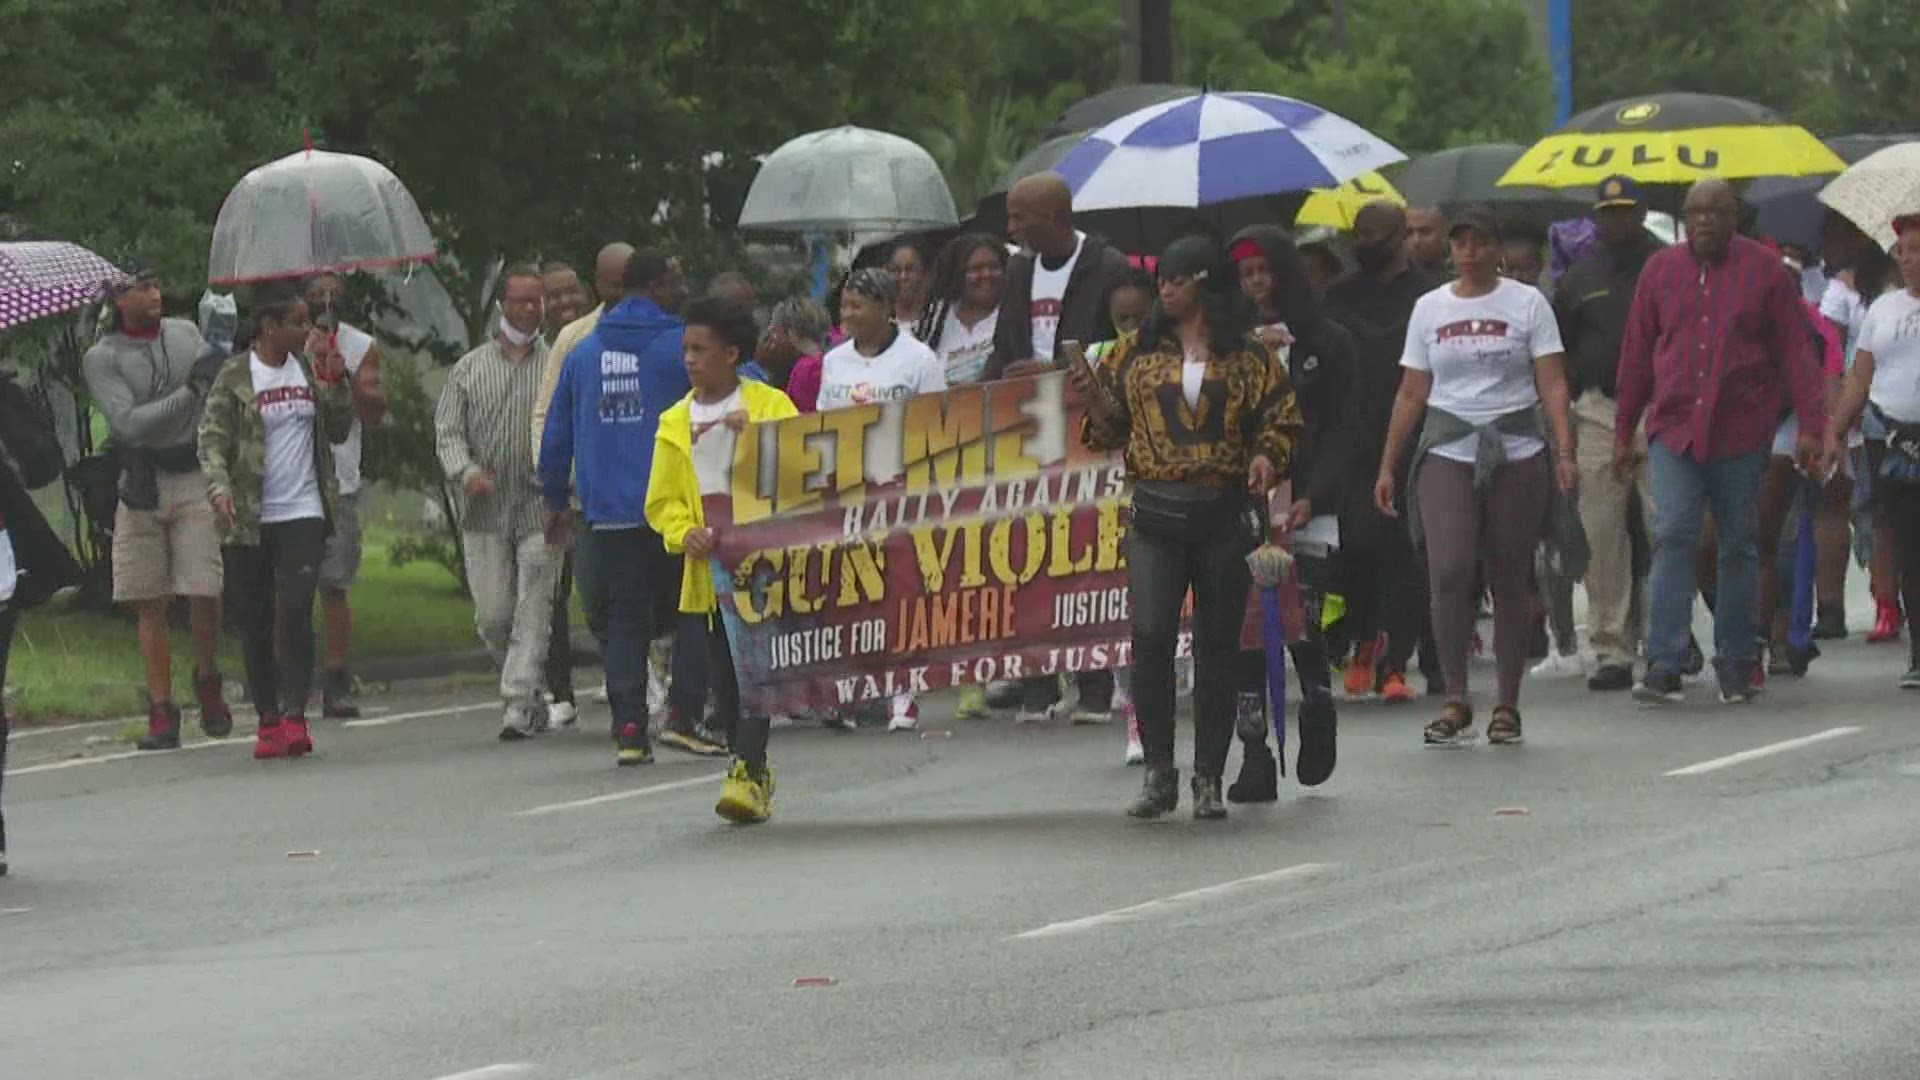 Families and friends marched through New Orleans Saturday pleading for the end to gun violence. The mothers of some young victims shot and killed led the marchers.